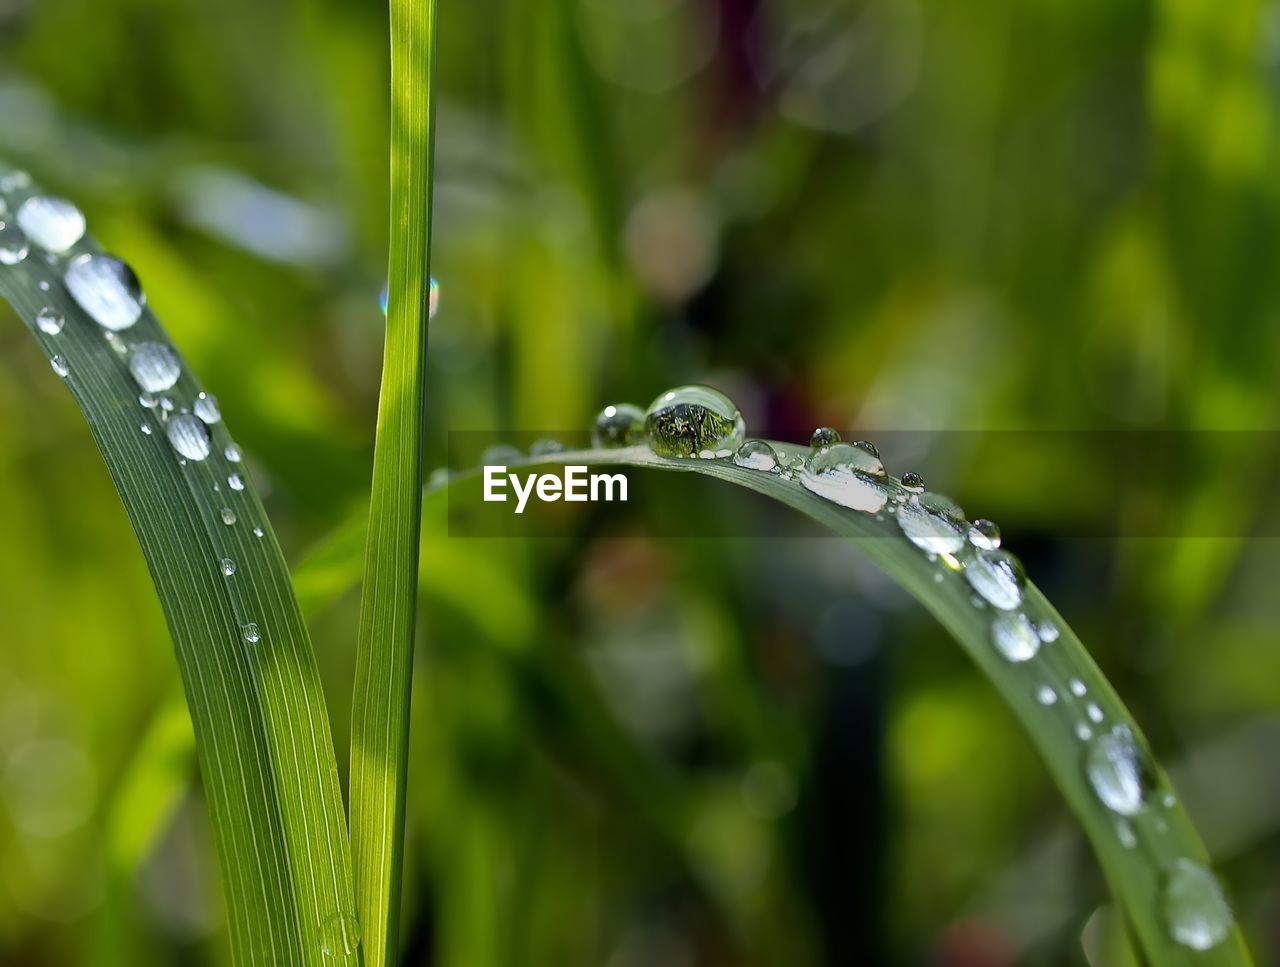 drop, water, wet, plant, nature, dew, moisture, grass, green, close-up, blade of grass, rain, plant part, leaf, beauty in nature, freshness, flower, no people, growth, purity, environment, plant stem, focus on foreground, raindrop, outdoors, macro photography, selective focus, day, macro, fragility, tranquility, hierochloe, summer, motion, sweet grass